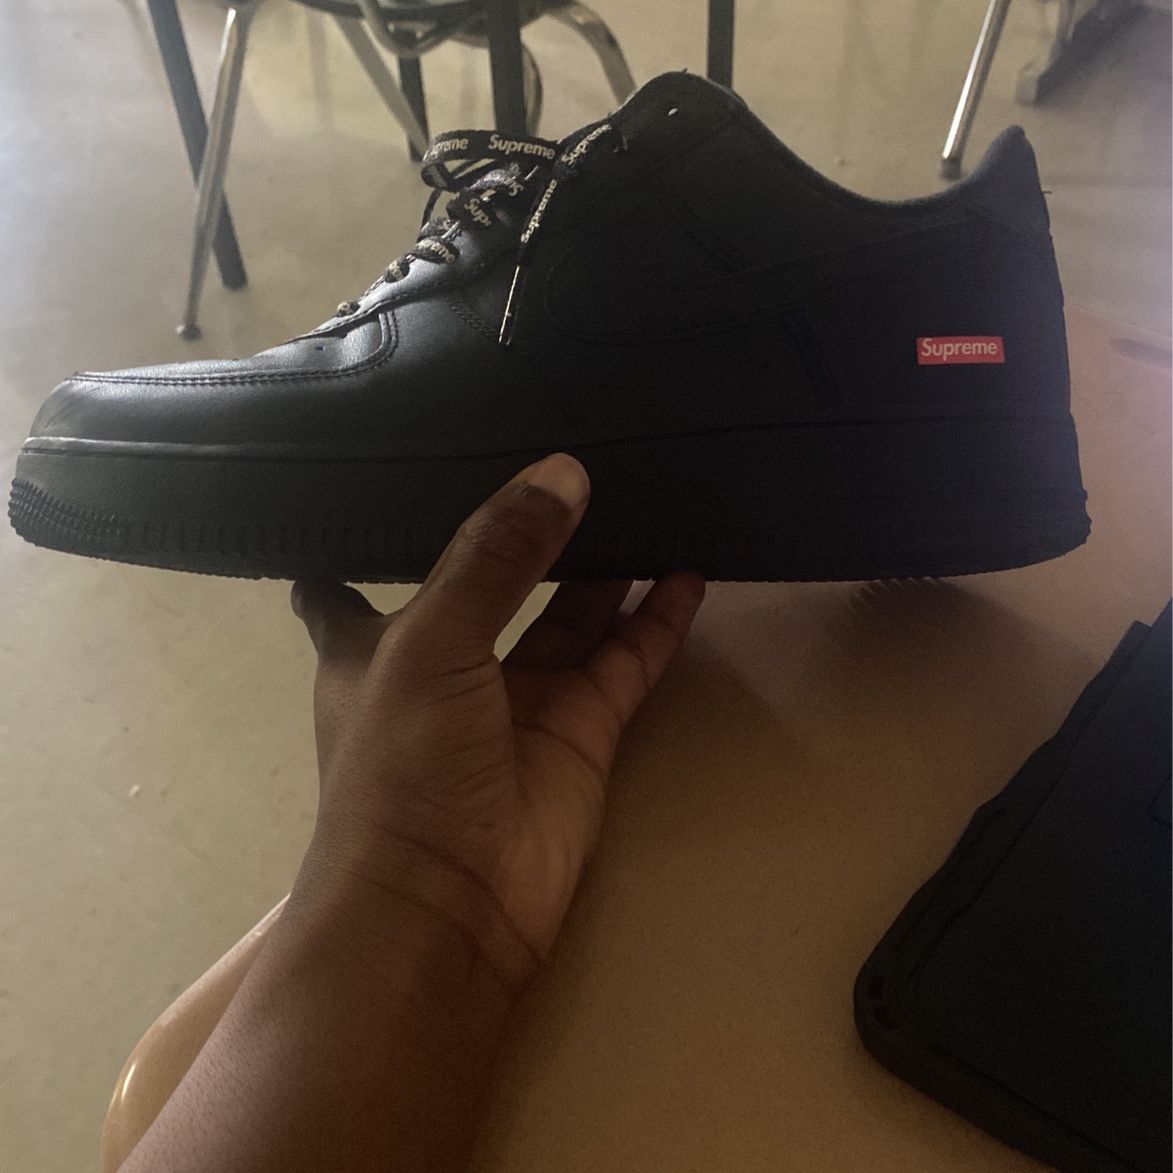 all black supreme forces goes for $220 im selling them for $150